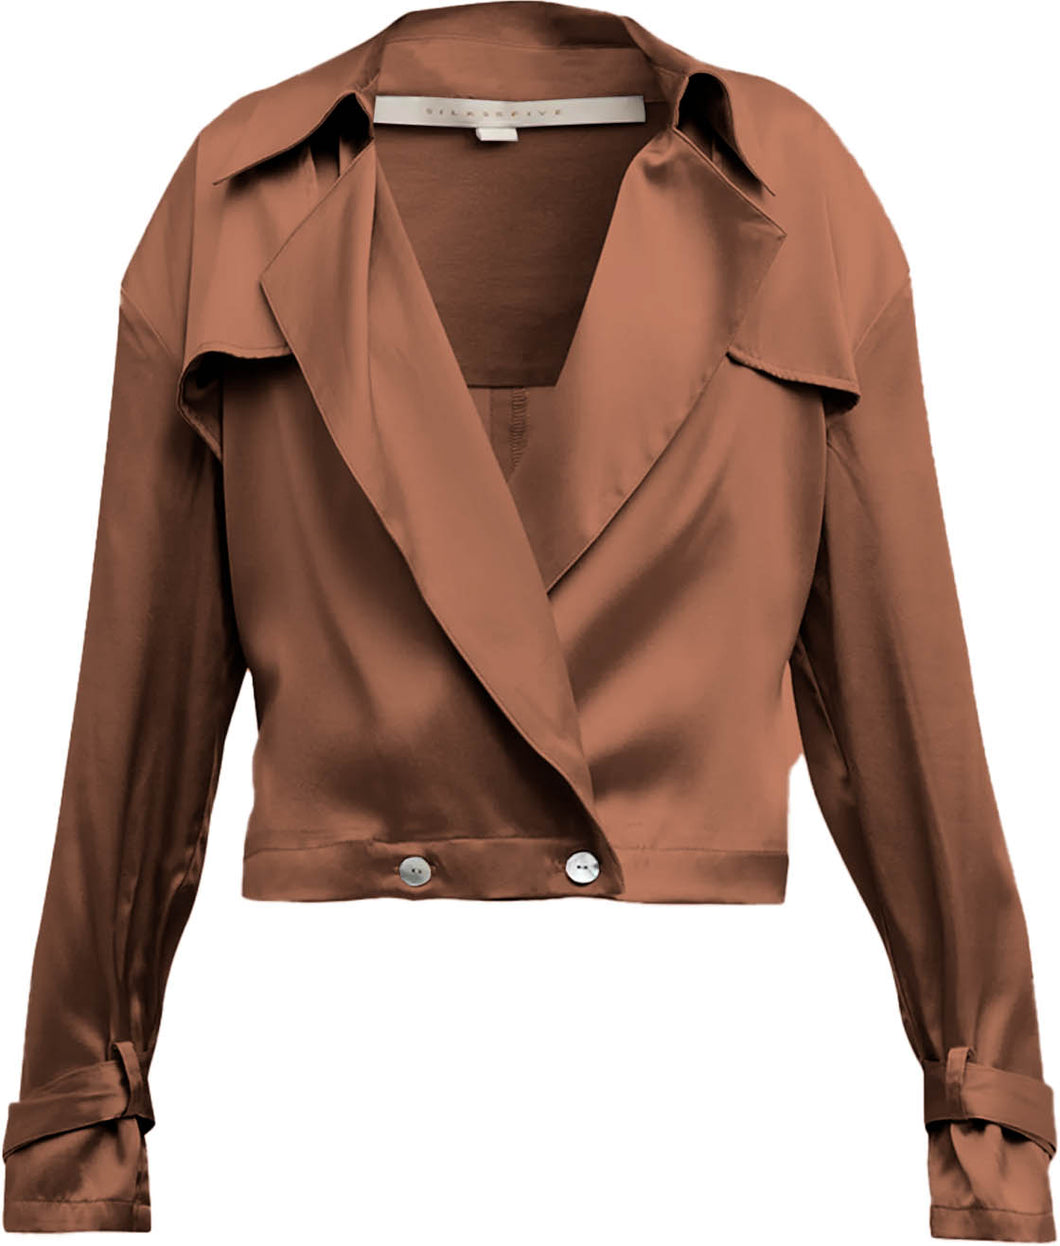 Kensington Trench Cropped